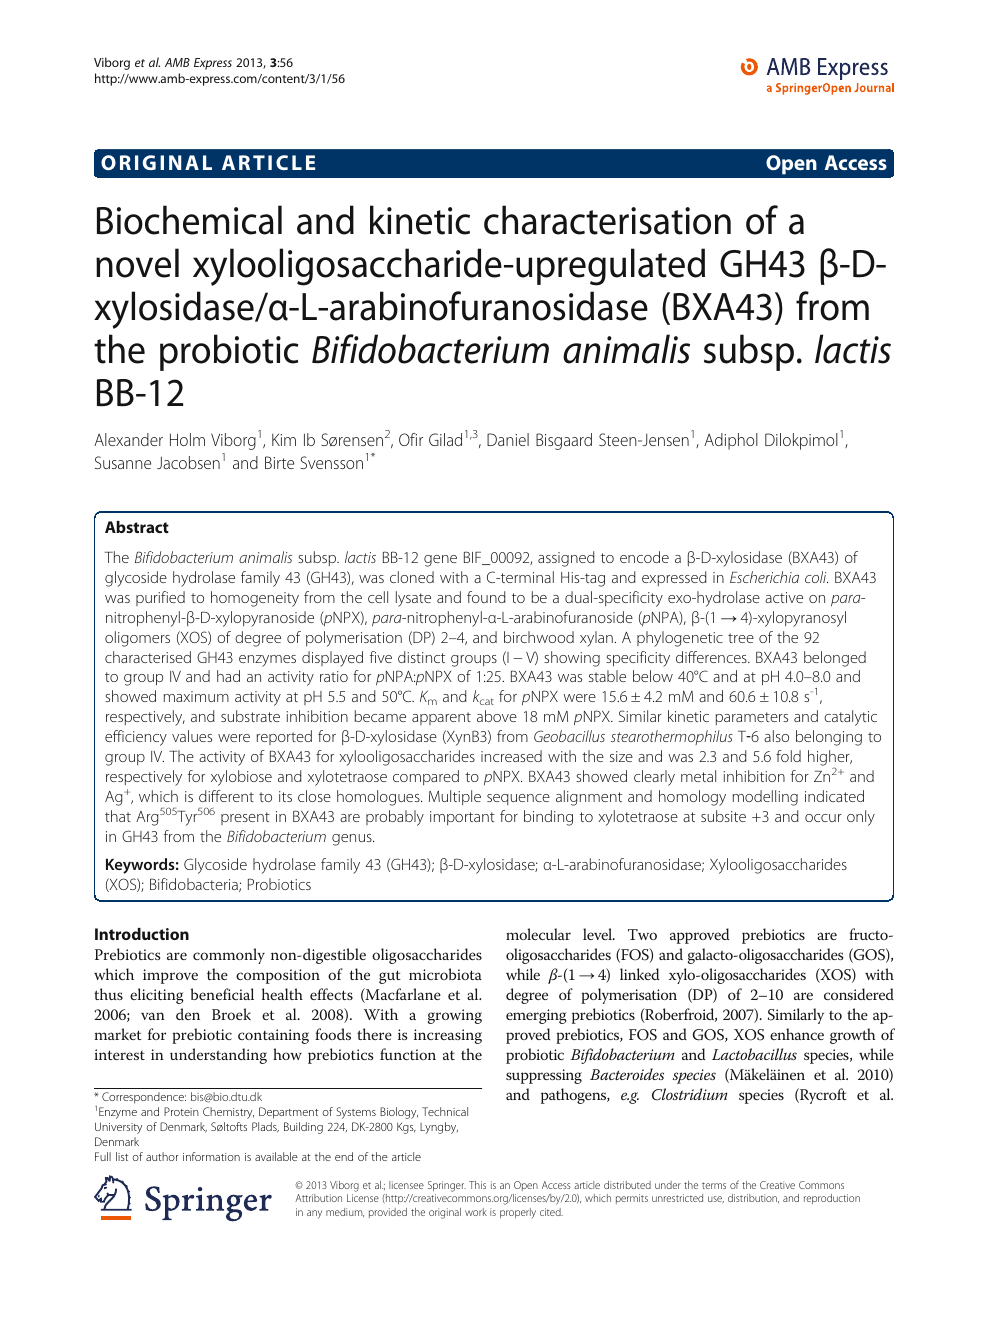 Biochemical And Kinetic Characterisation Of A Novel Xylooligosaccharide Upregulated Gh43 B D Xylosidase A L Arabinofuranosidase Bxa43 From The Probiotic Bifidobacterium Animalis Subsp Lactis 12 Topic Of Research Paper In Veterinary Science